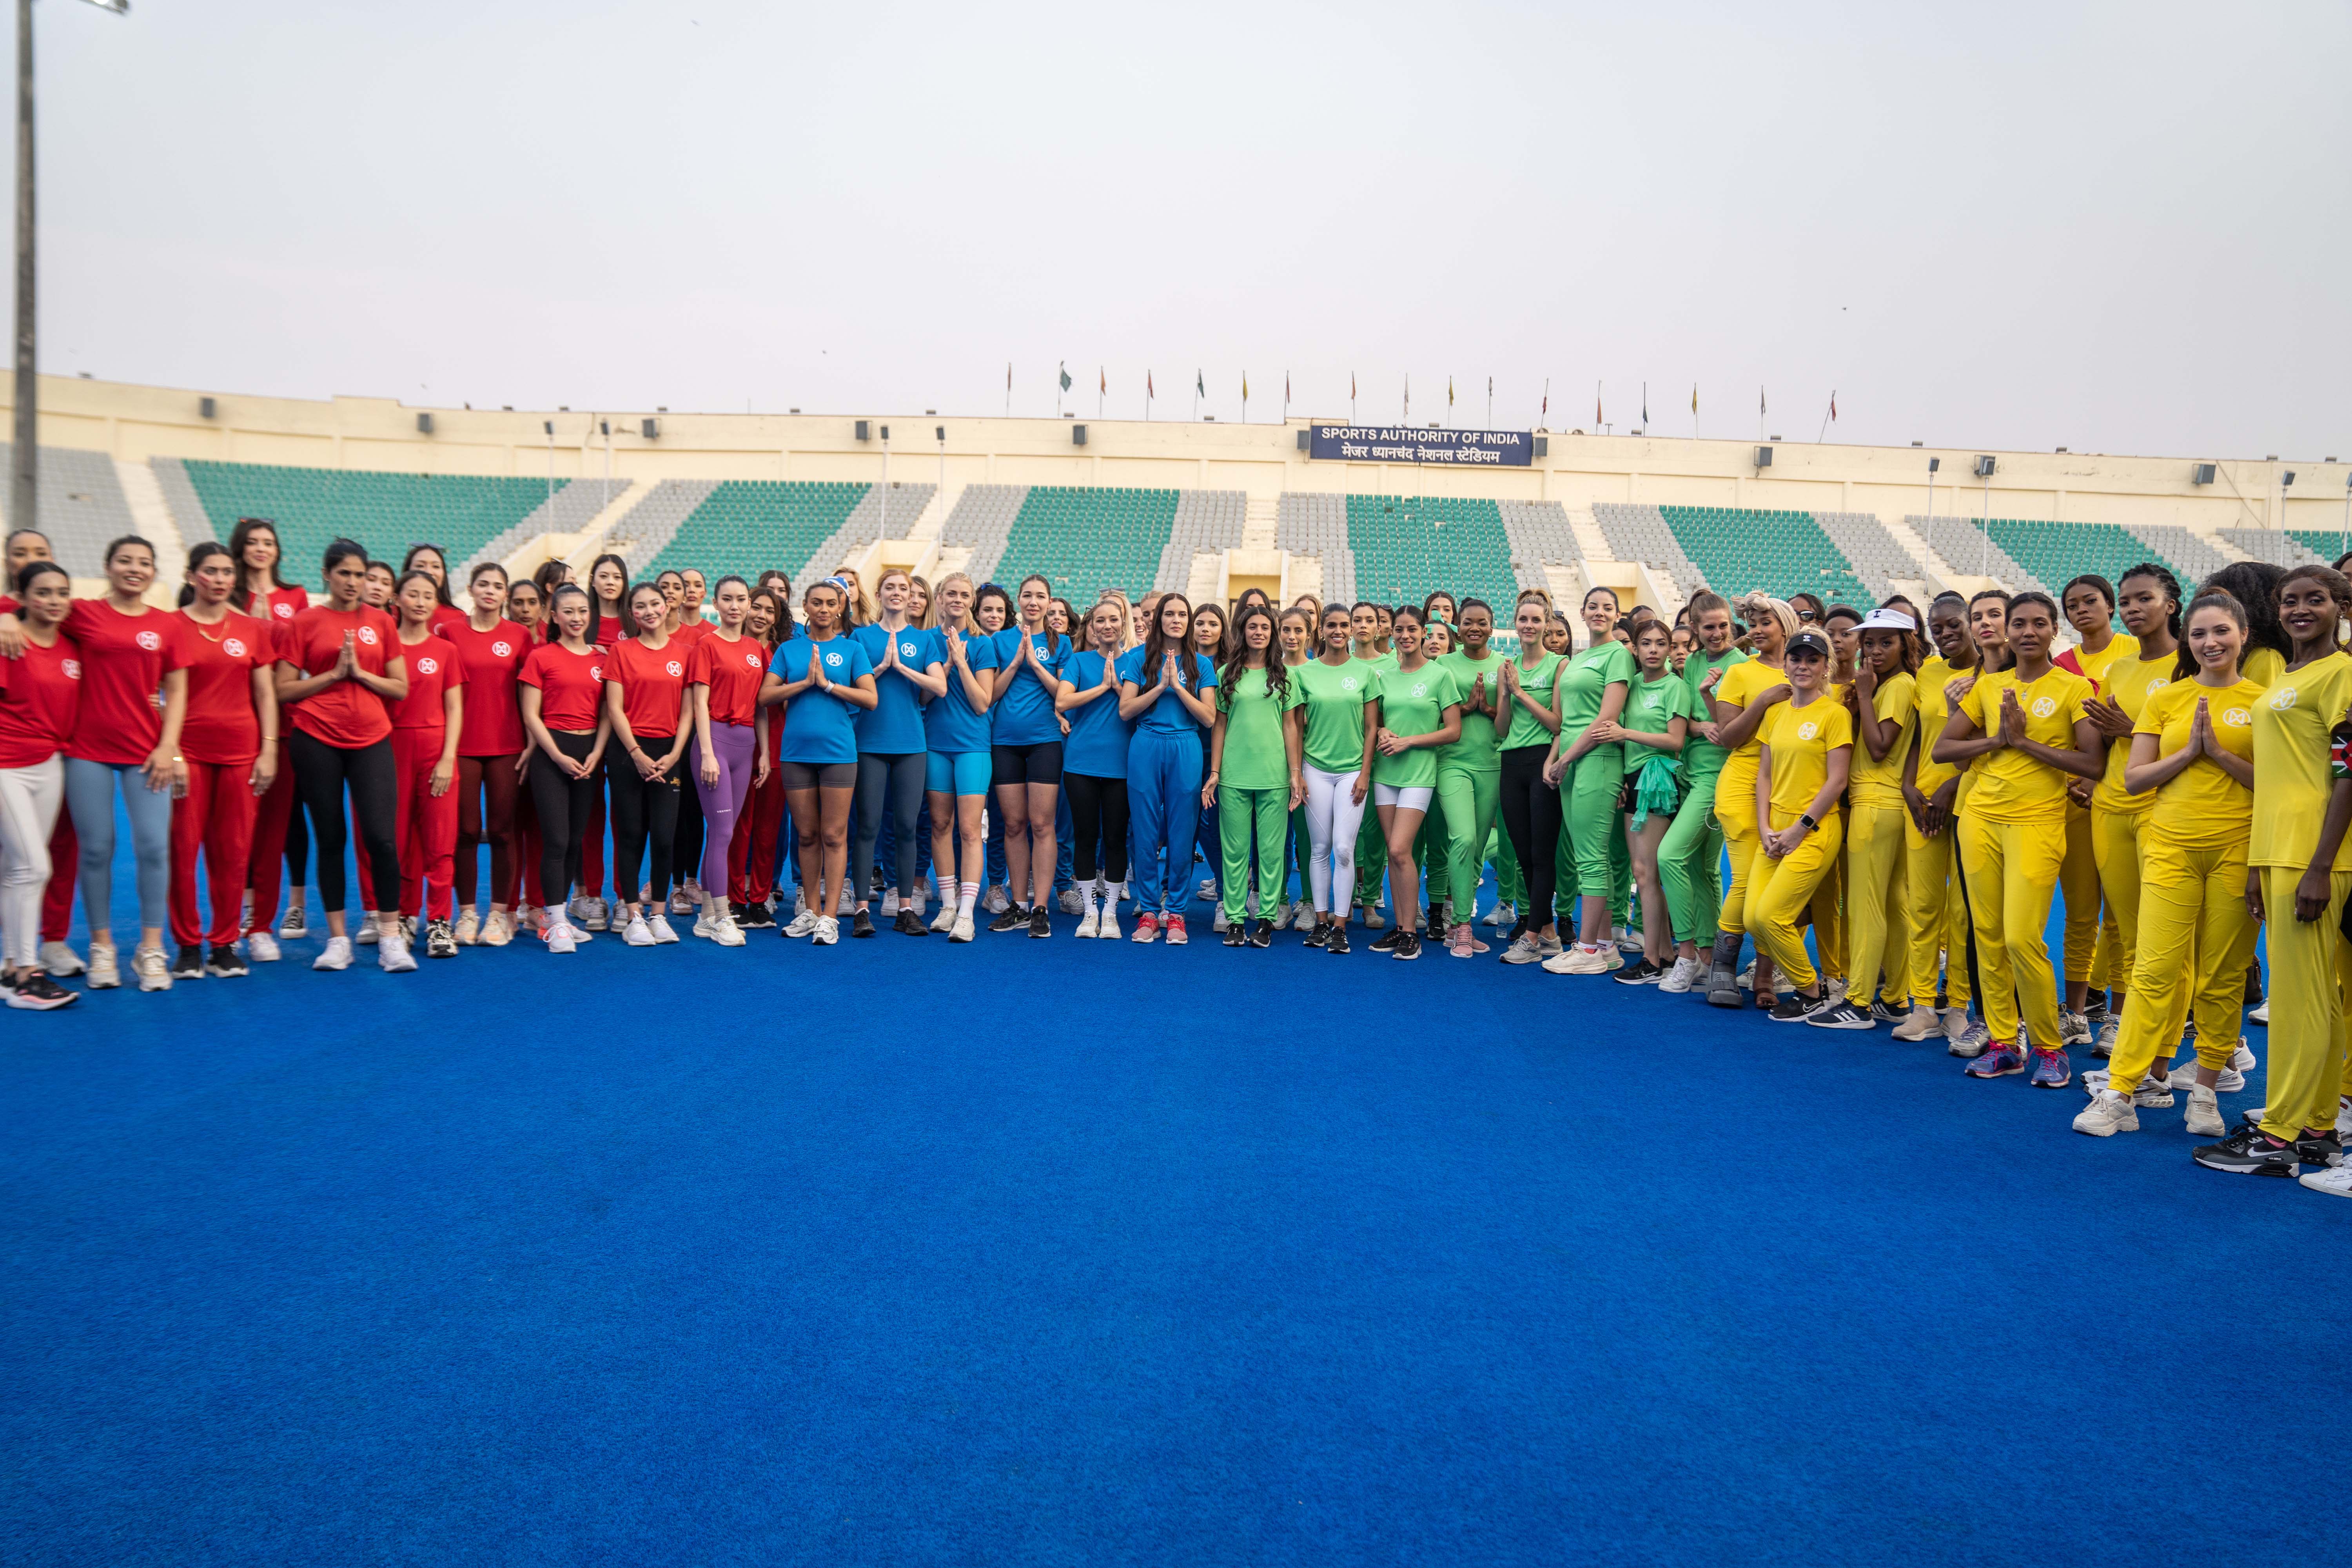 71st Miss World contestants at Major Dhyaan Chand Stadium for Sports Challenge